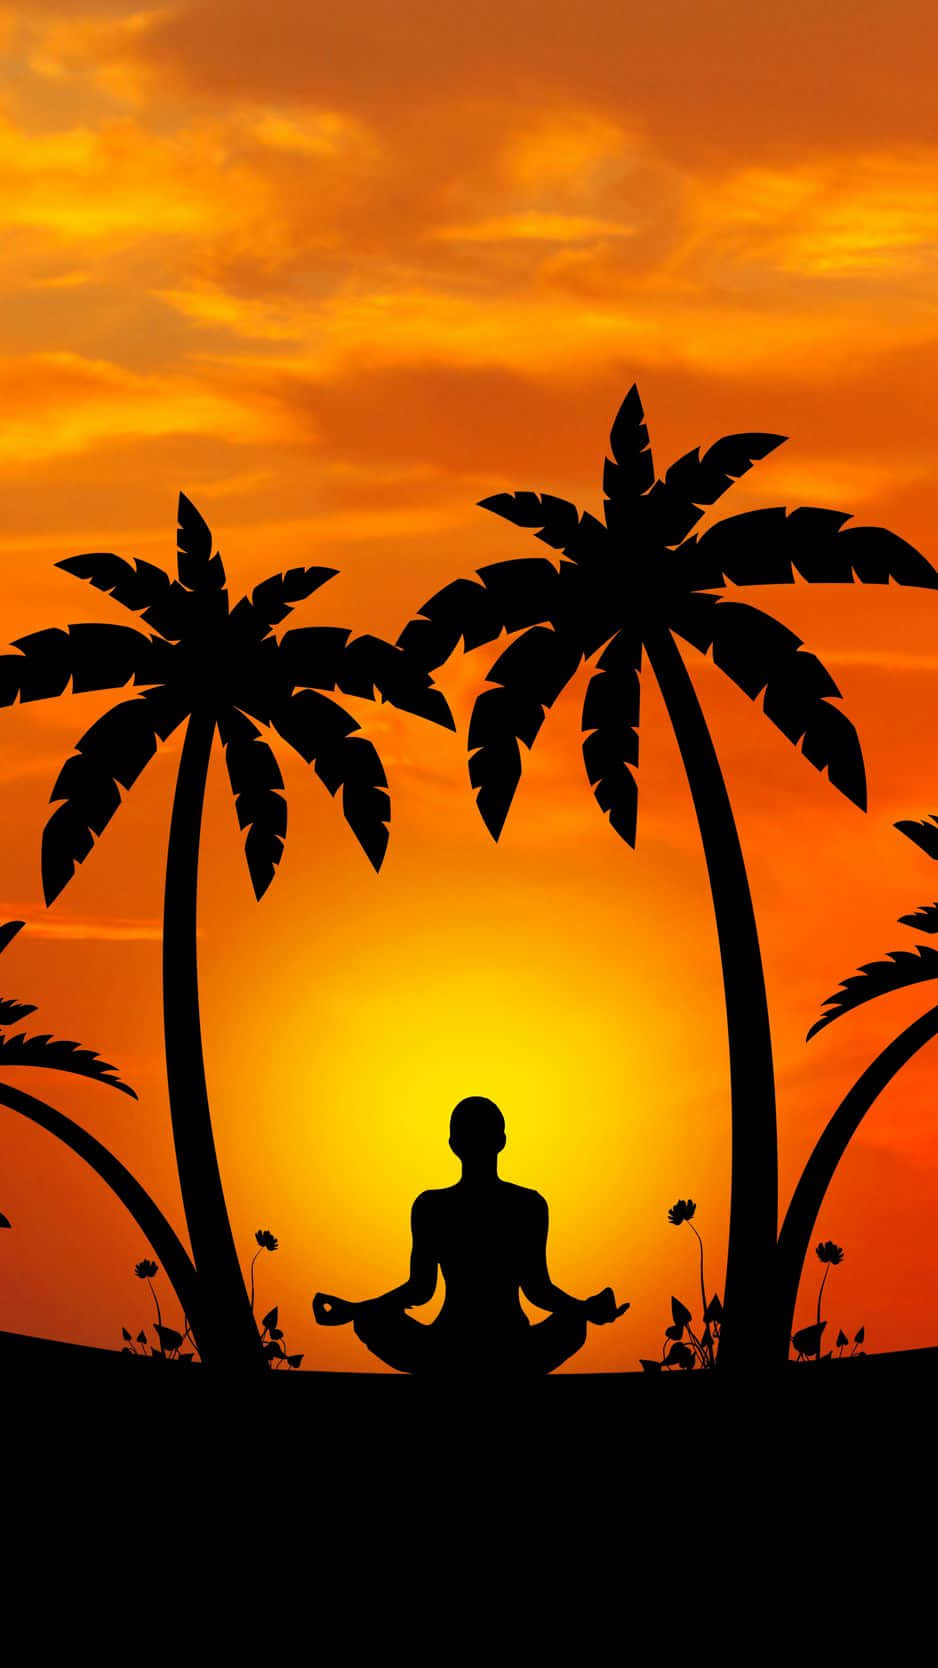 "Unlock your inner peace with meditation, anytime and anywhere" Wallpaper